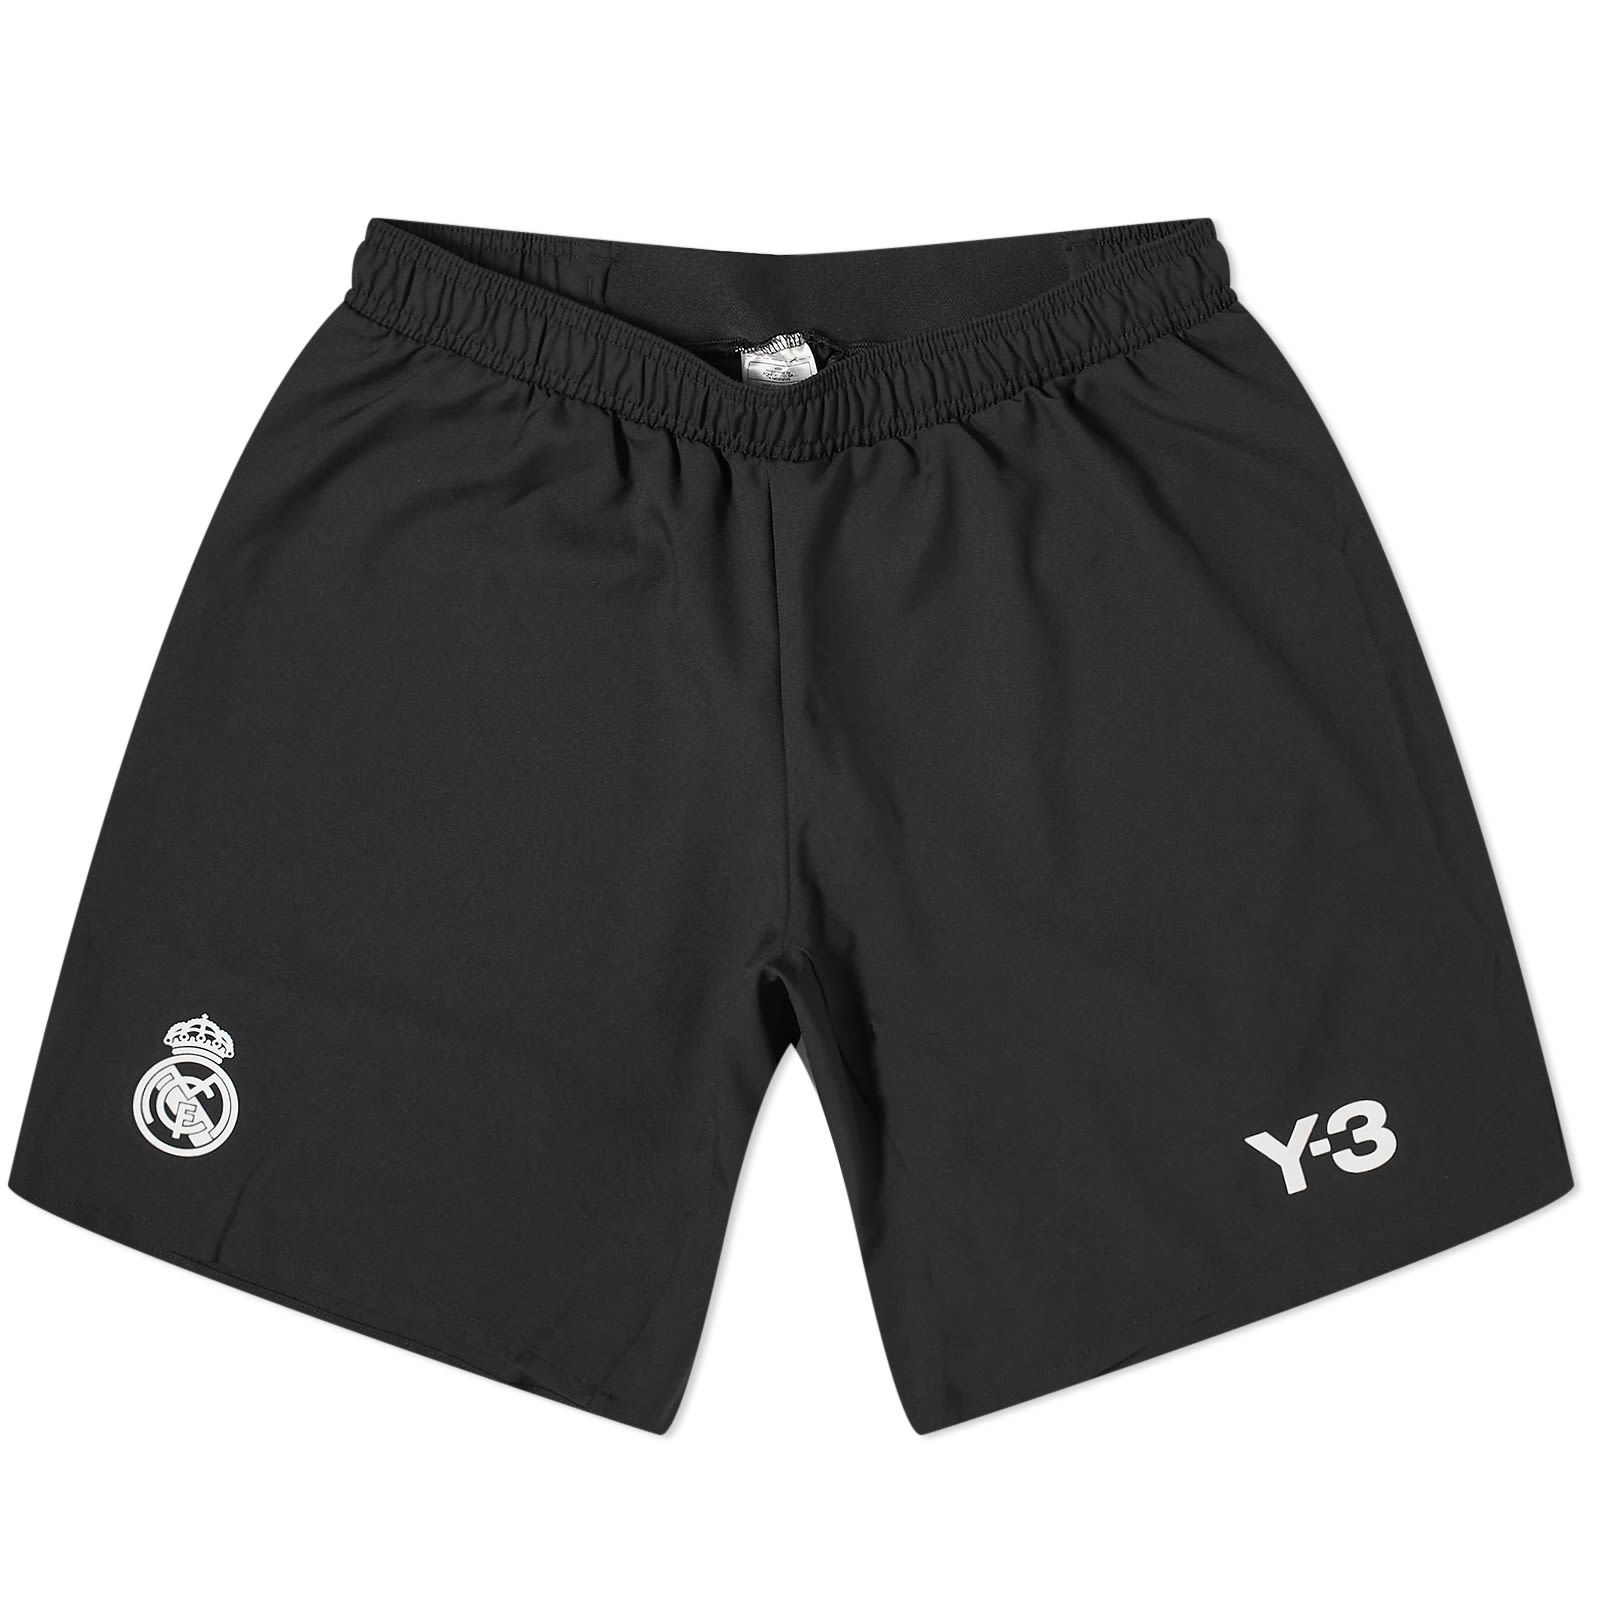 Y-3 x Real Madrid 4th Goalkeeper Jersey Shorts - 1